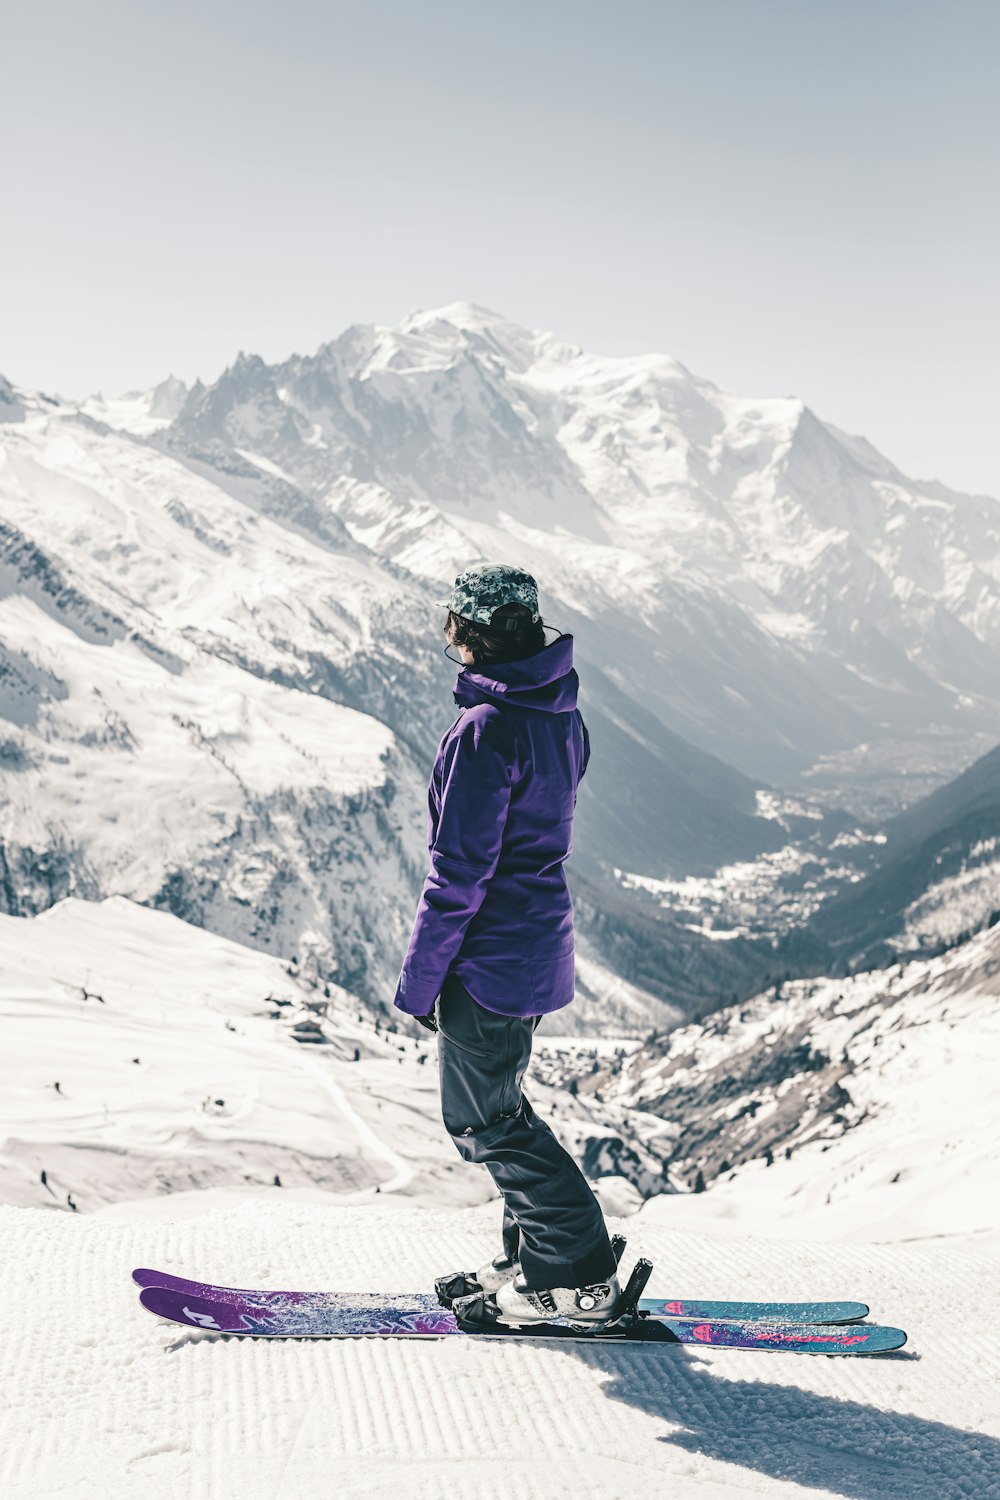 a person on a snowboard on a snowy mountain